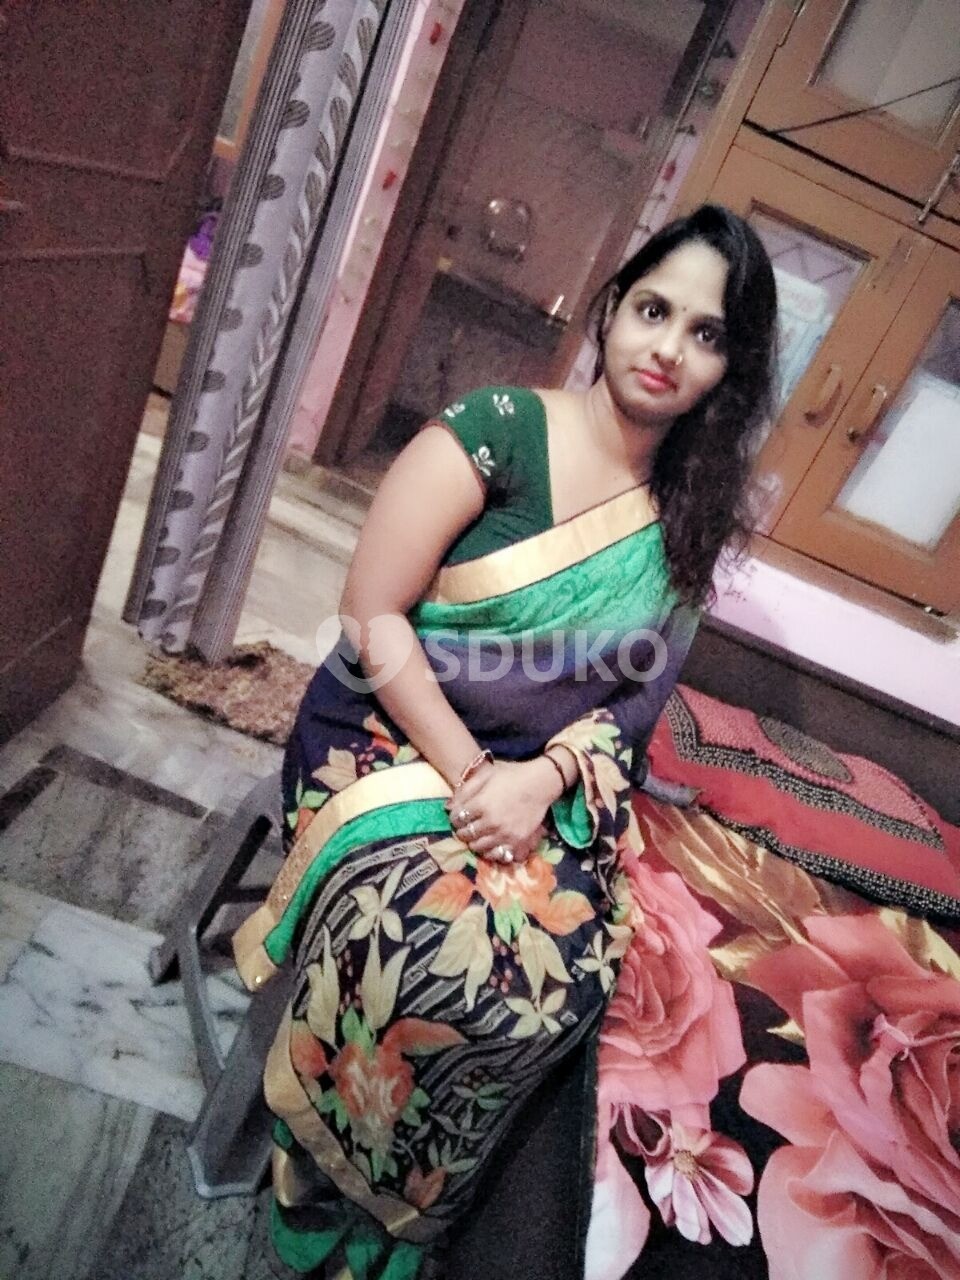 Vellore .✅ MYSELF VIDYA ☎️ ESCORT SERVICE TAMIL INDIPENDENT DOORSTEP GIRL HOUSEWIFE COLLEGE FULL SAFE AND SECURE S